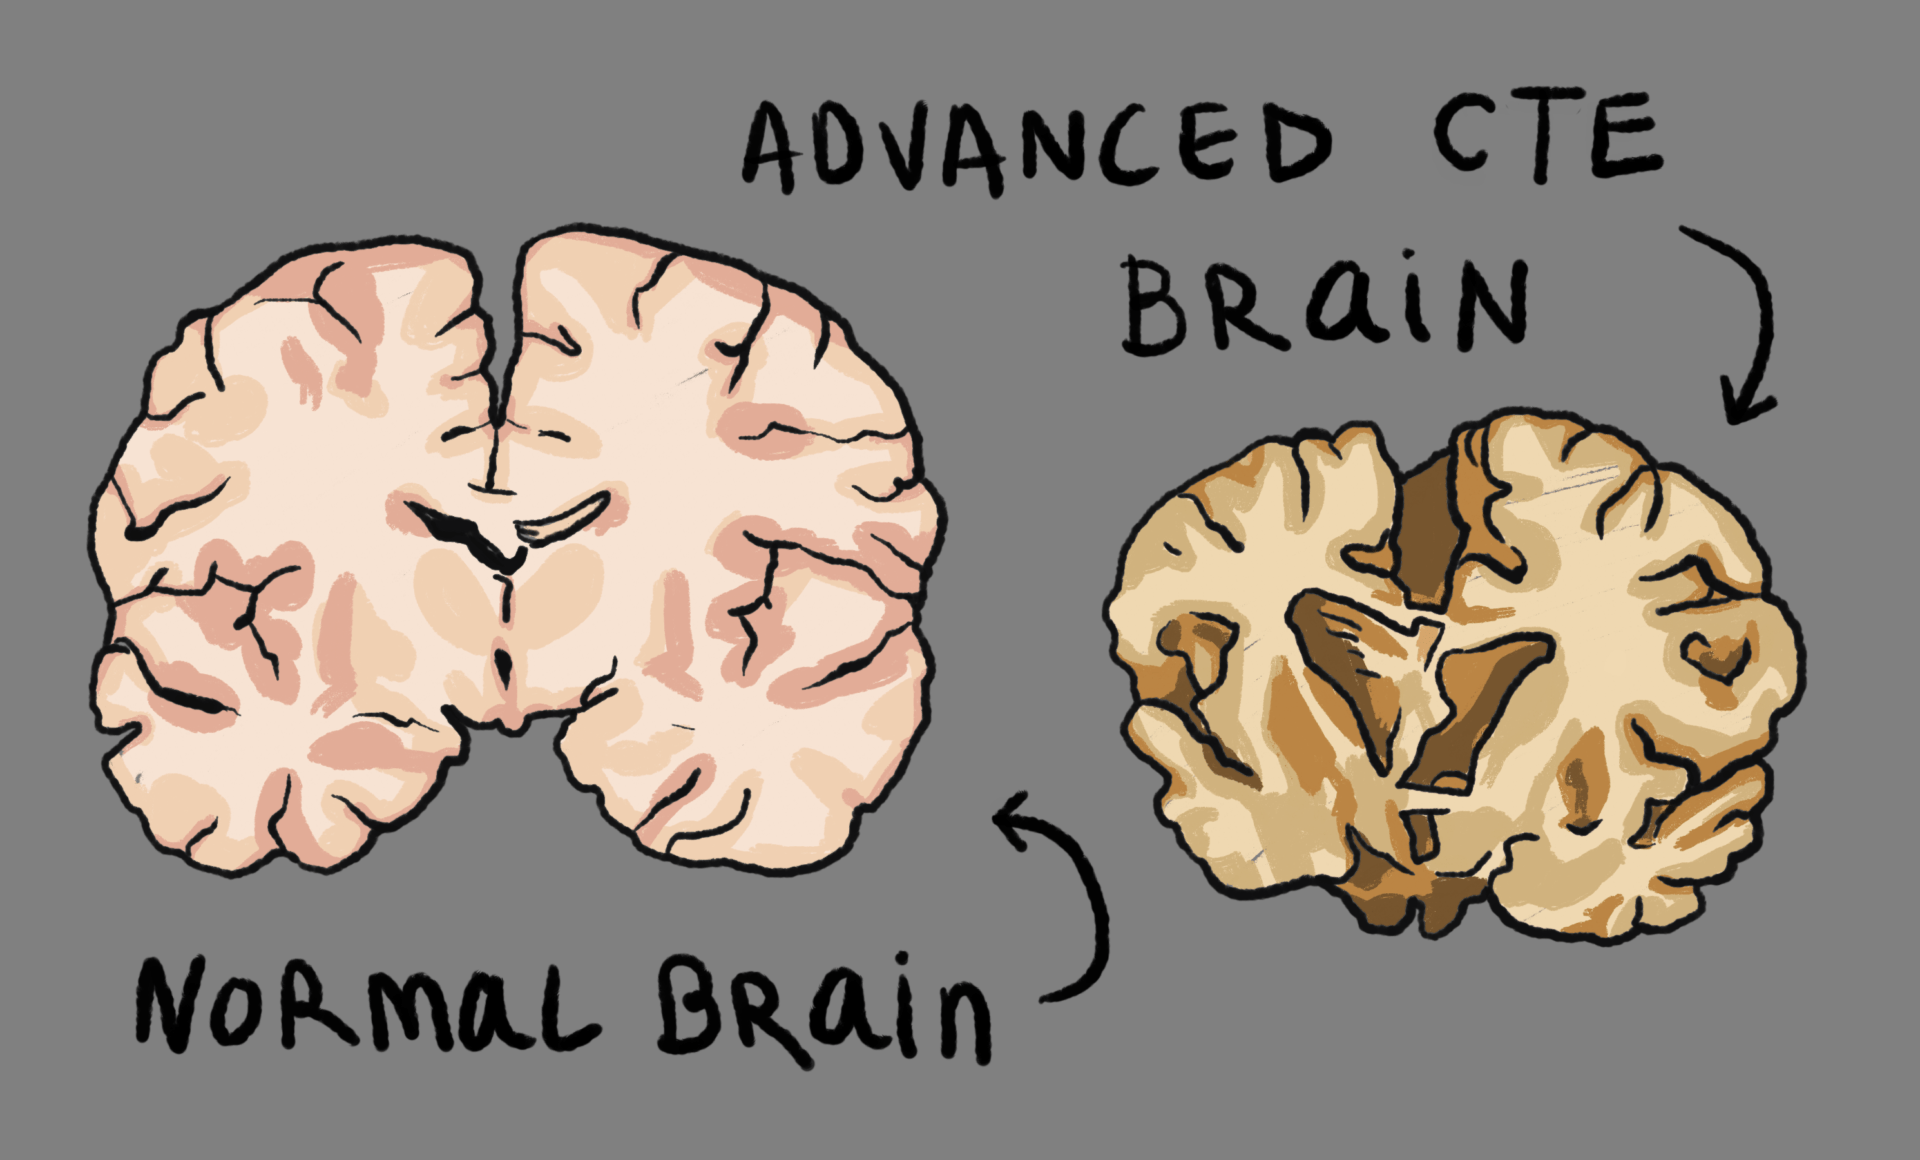 We need brain donations to further CTE / TES research!